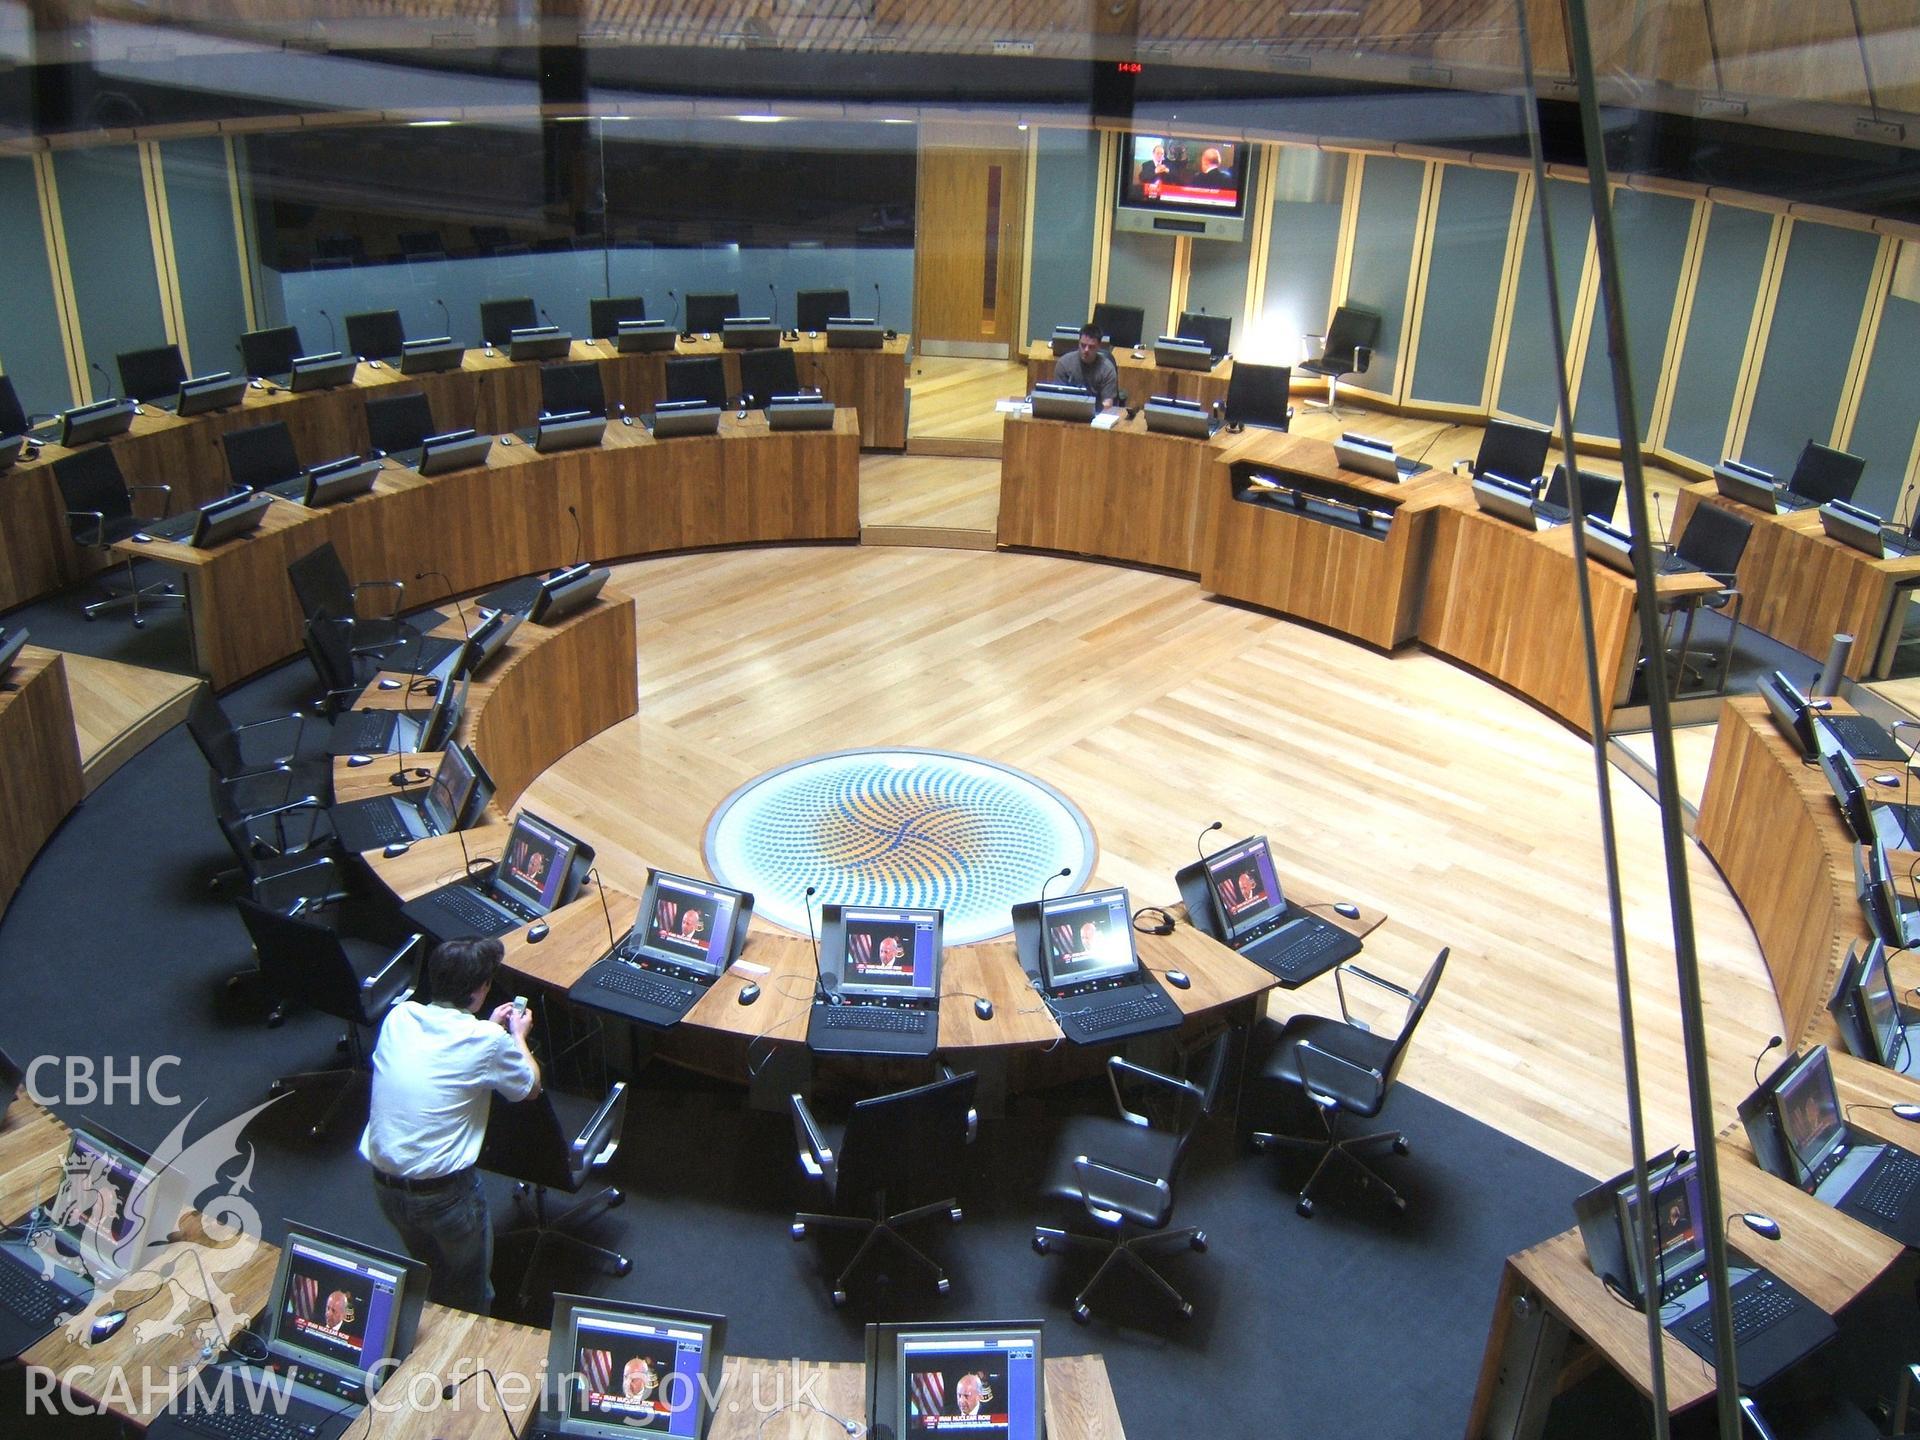 Debating Chamber from Public Gallery looking north.